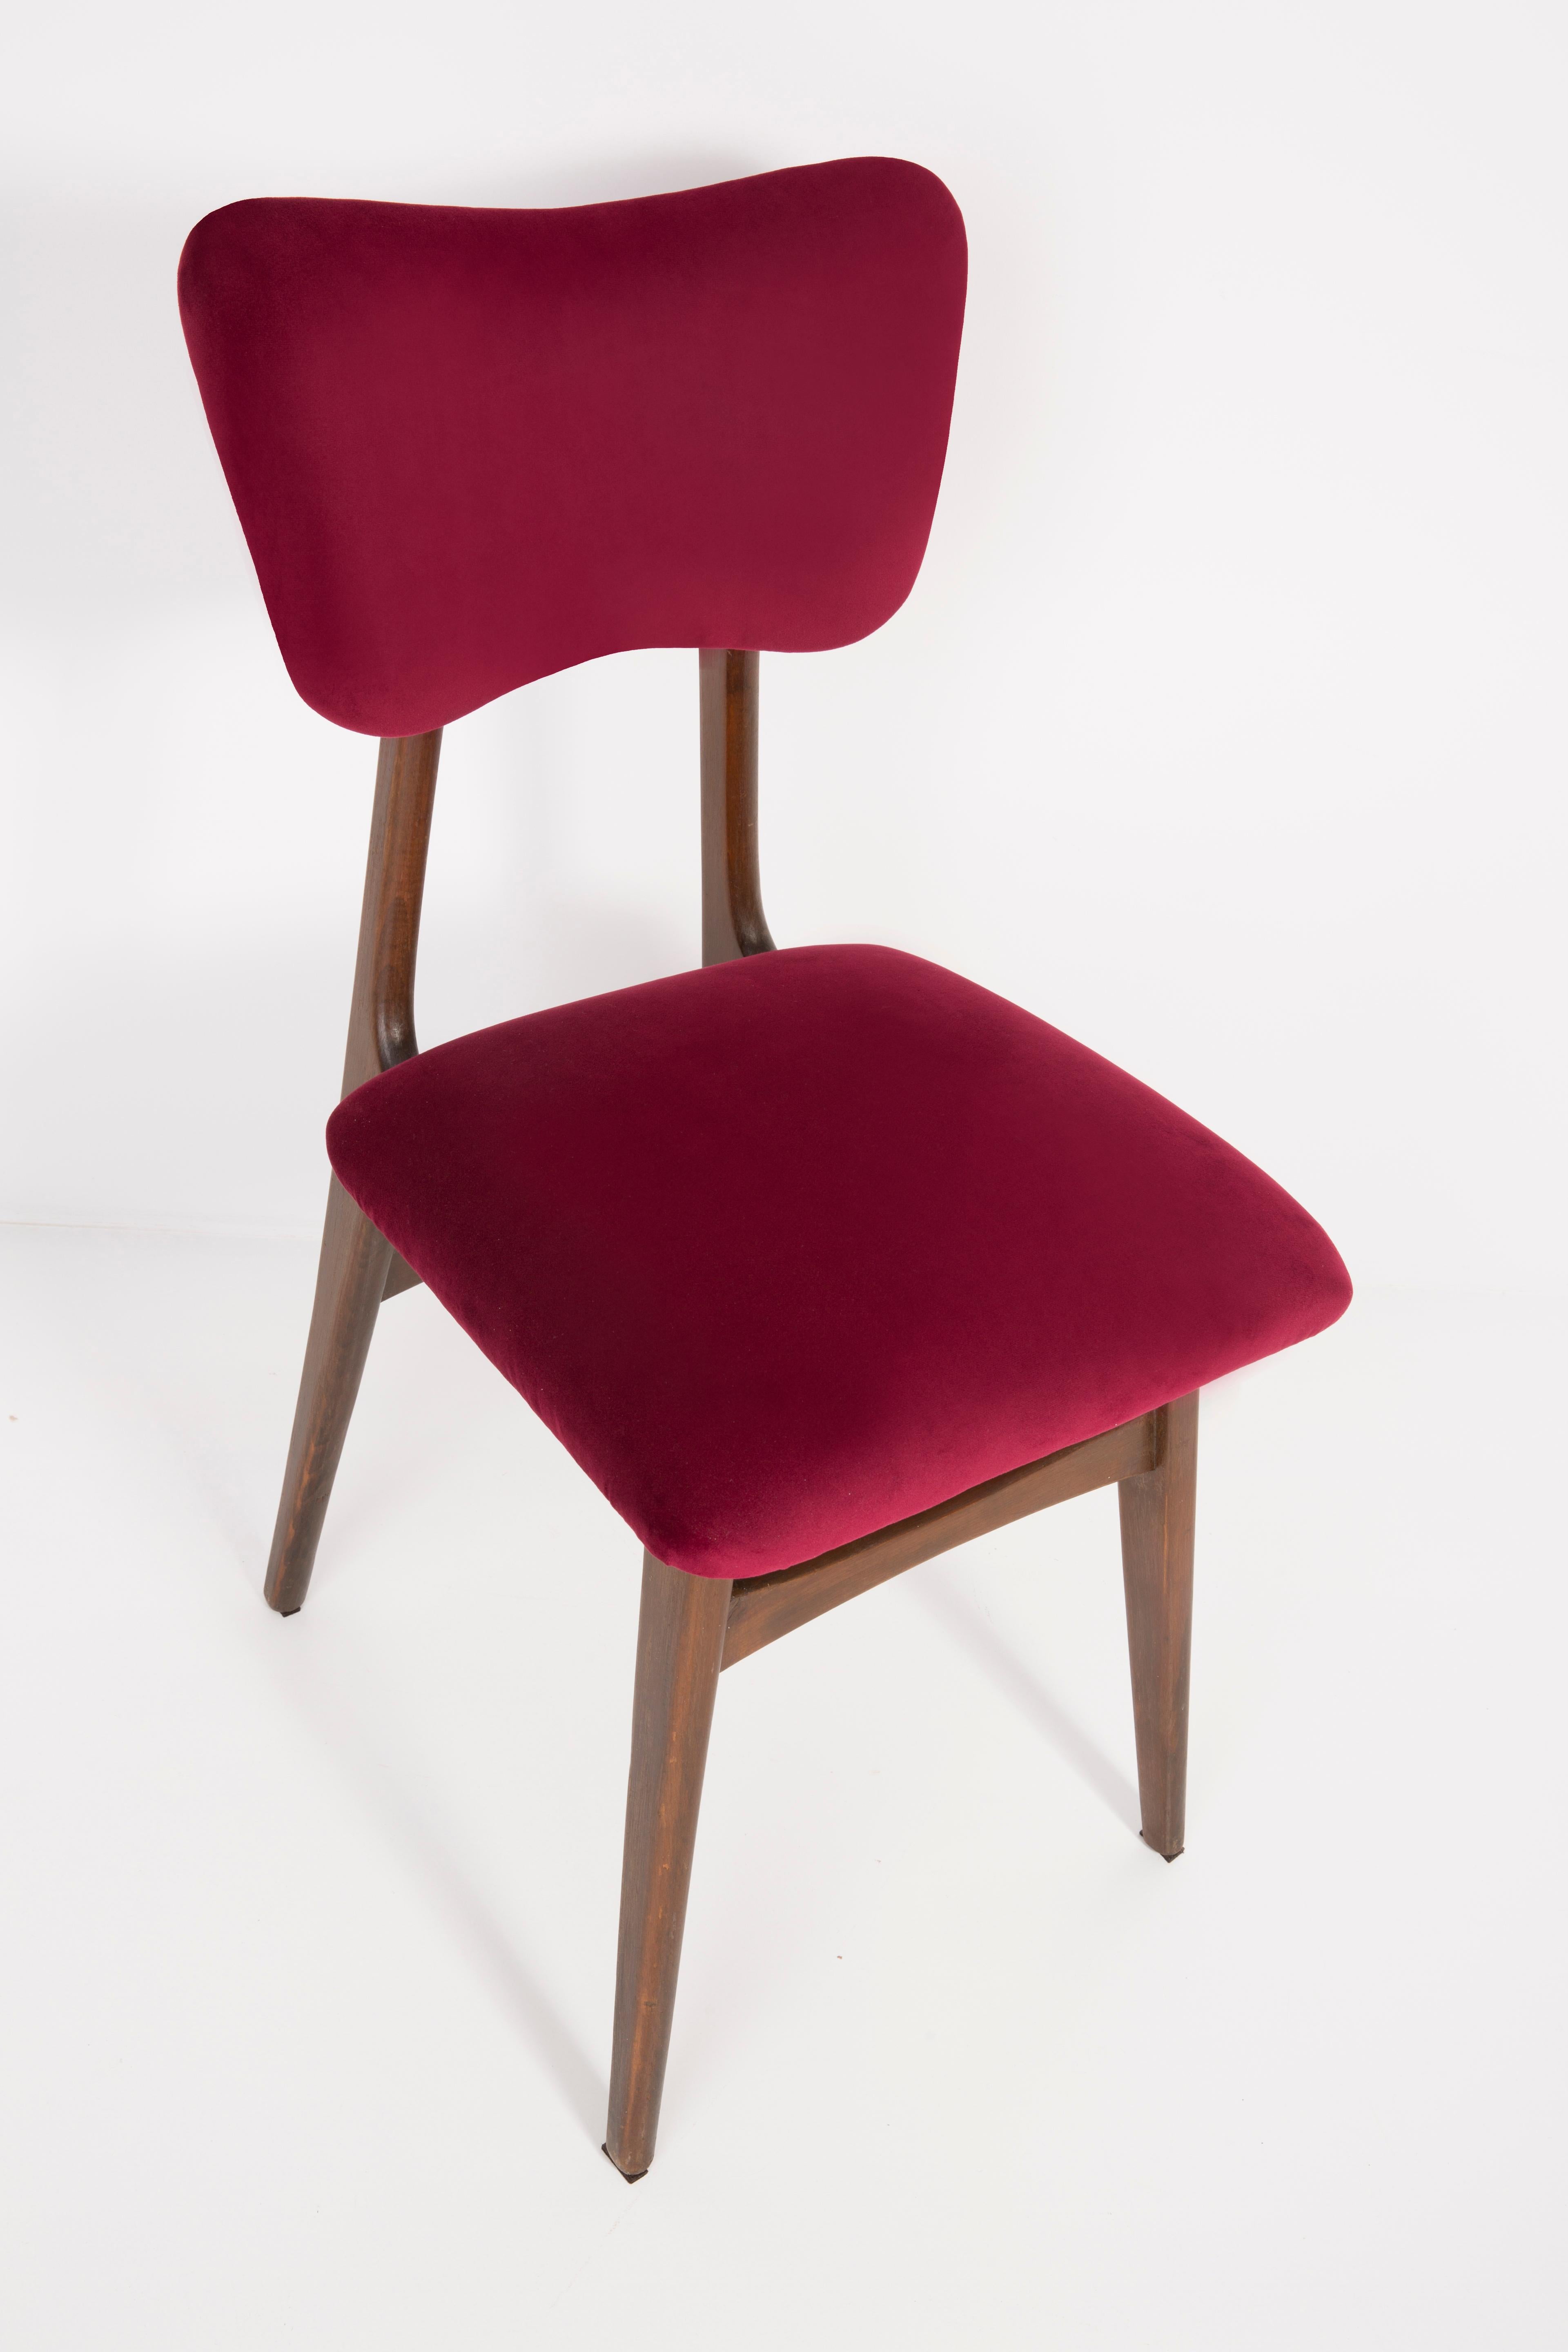 Six 20th Century Burgundy Red Chairs, 1960s For Sale 3